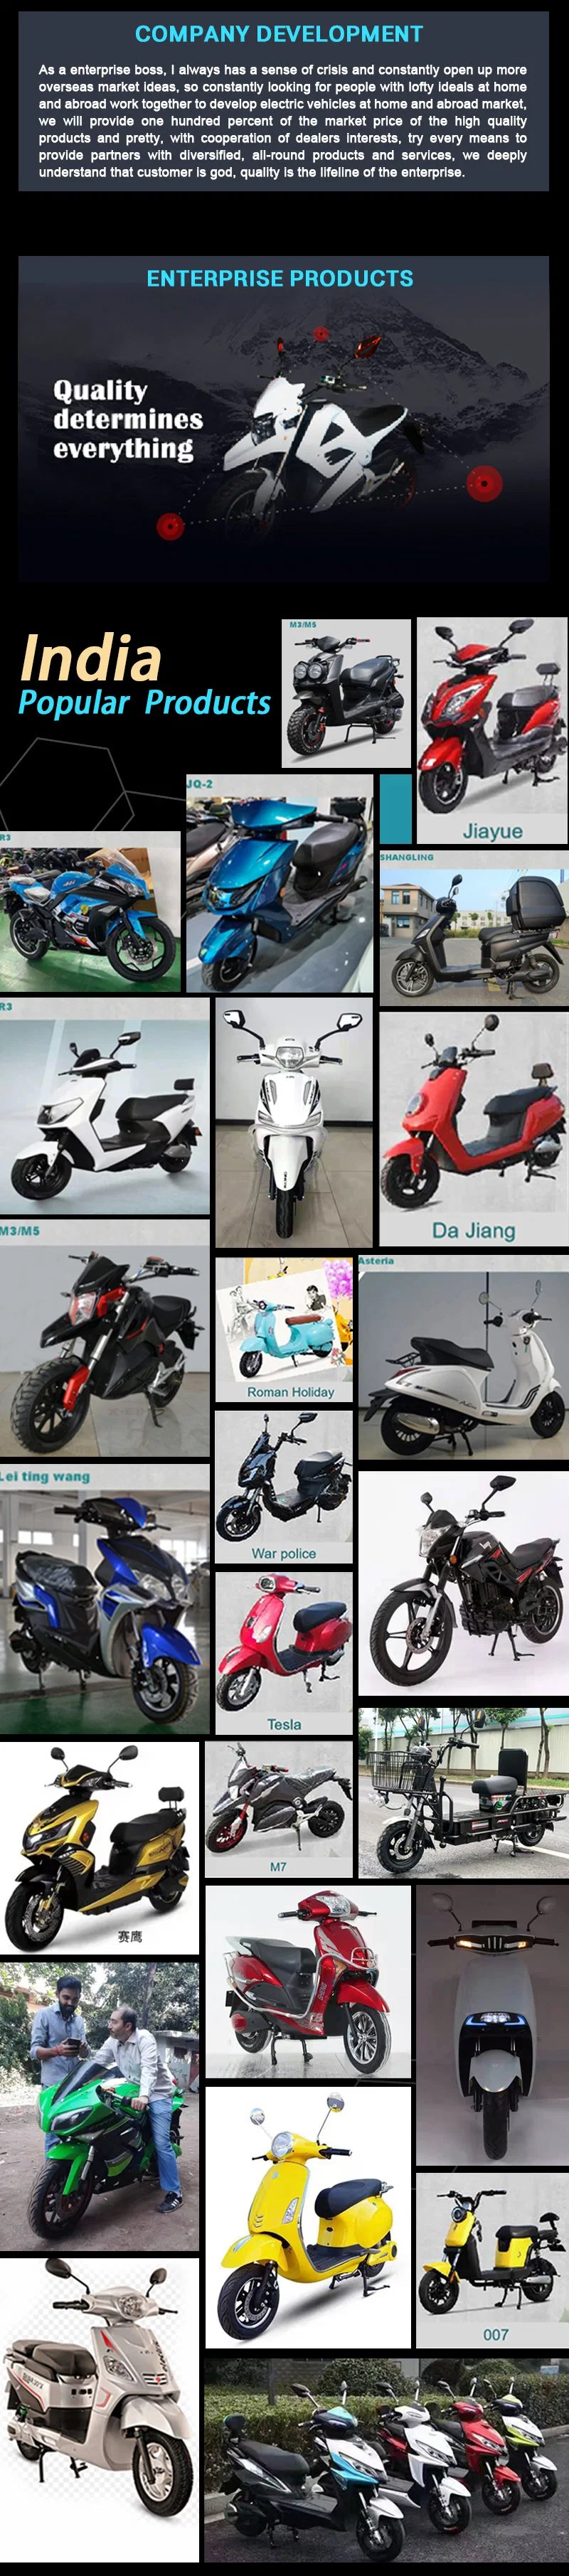 Lithium Btttery 800W Powerful Motor Electric Scooter/Motorcycle Lithium48V20ah Fast Speed